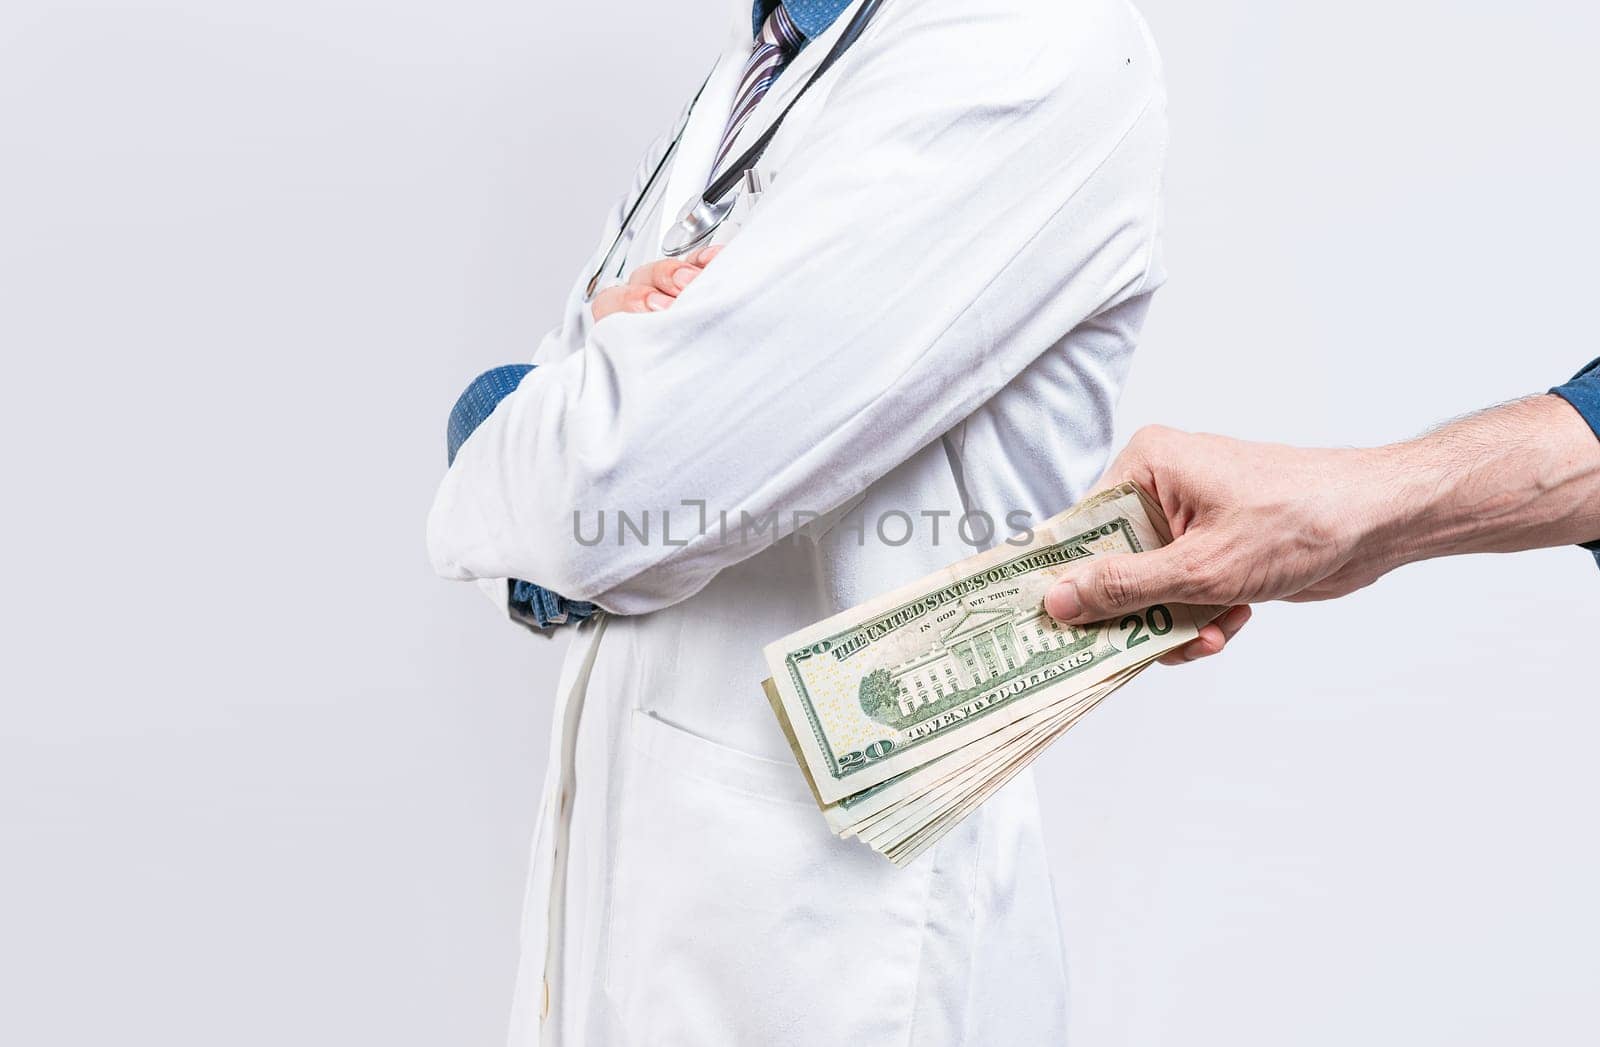 Hand of person bribing doctor. Hands putting money in doctor pocket, Medical bribery concept